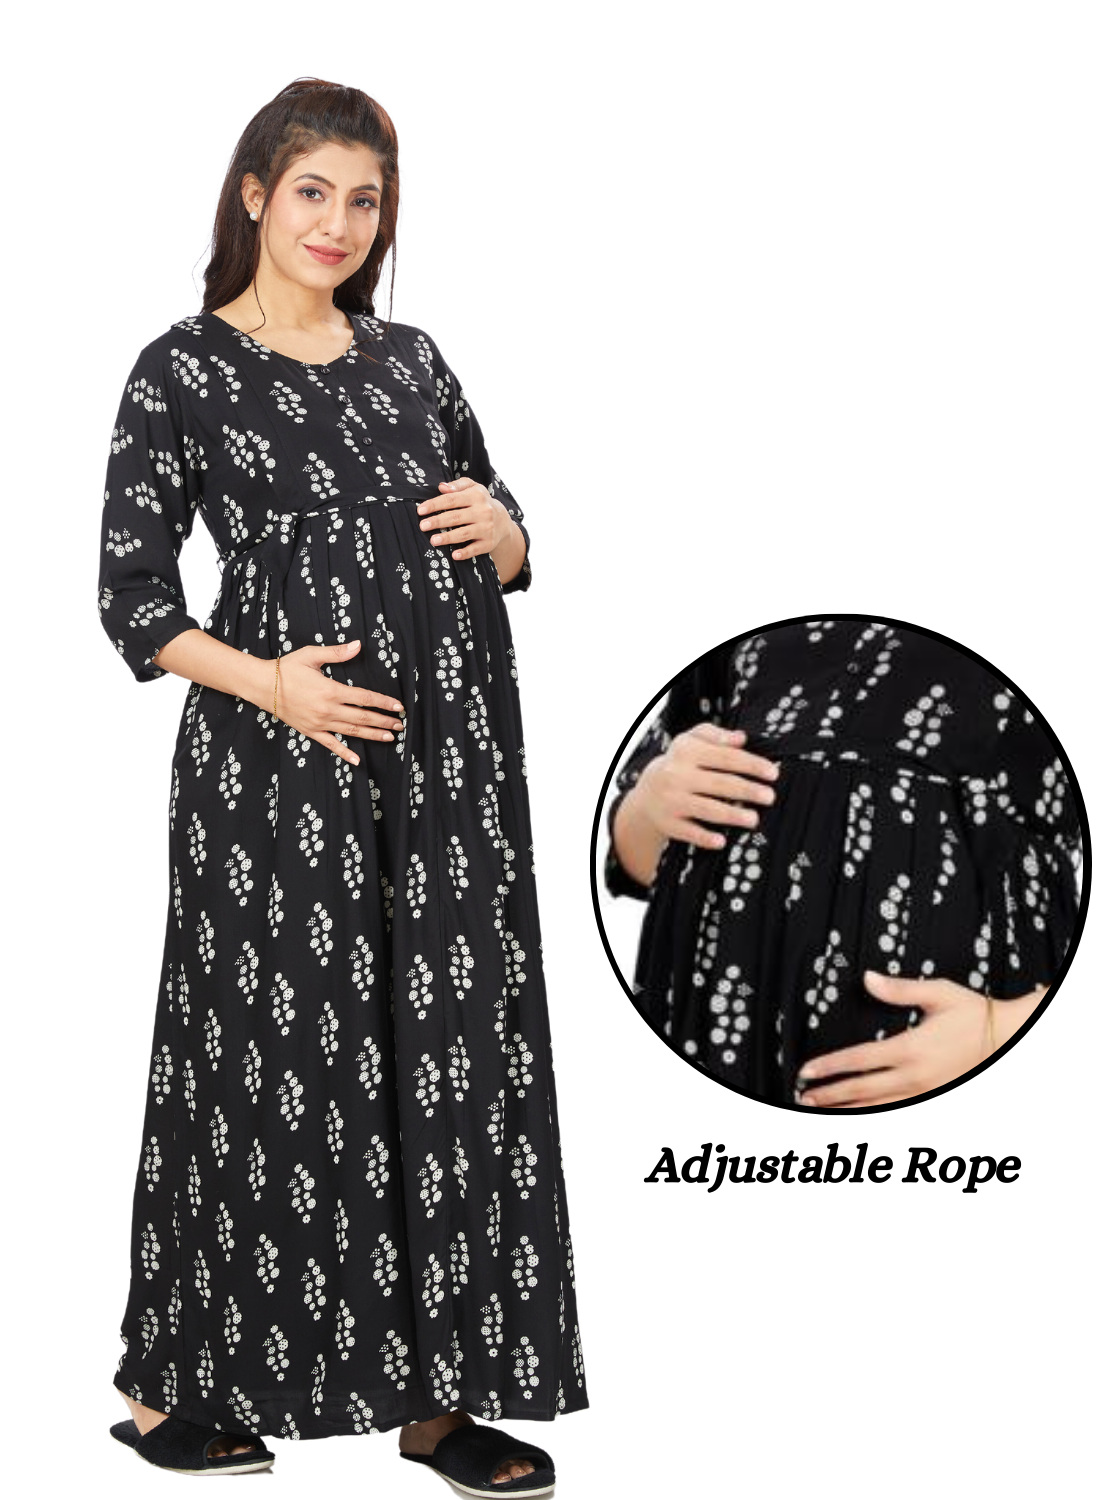 New ArrivalsONLY MINE Premium 4-IN-ONE Mom's Wear - Soft & Smooth Rayon | Maternity | Feeding | Long Frock | Casual Wear for Pregnancy Women's